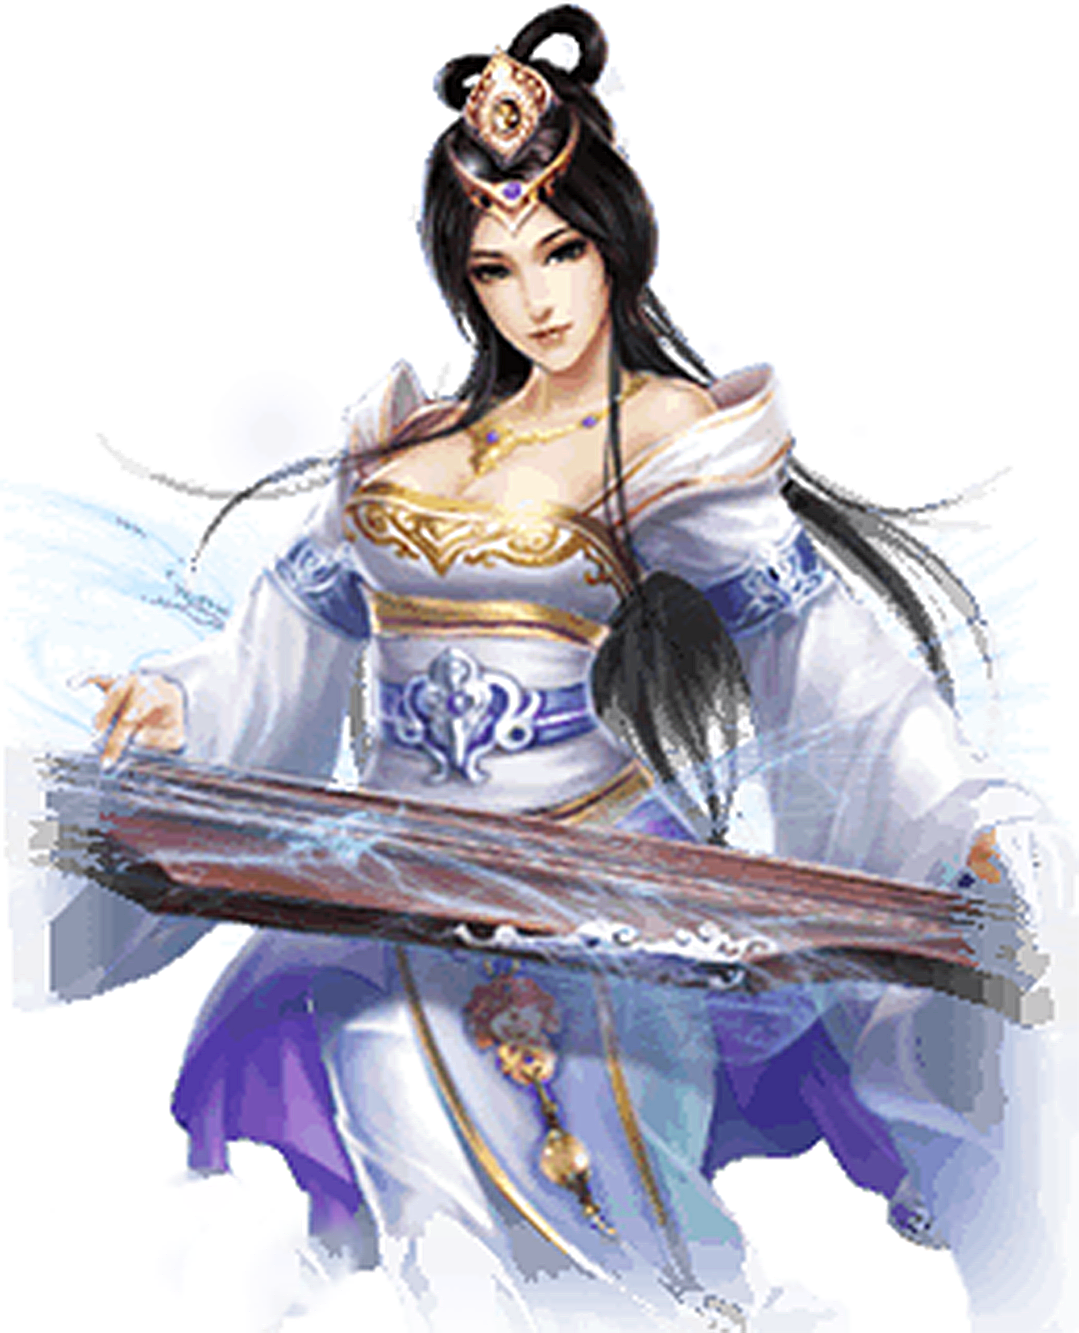 Ni Hao, Li Huan Ying download the new version for iphone